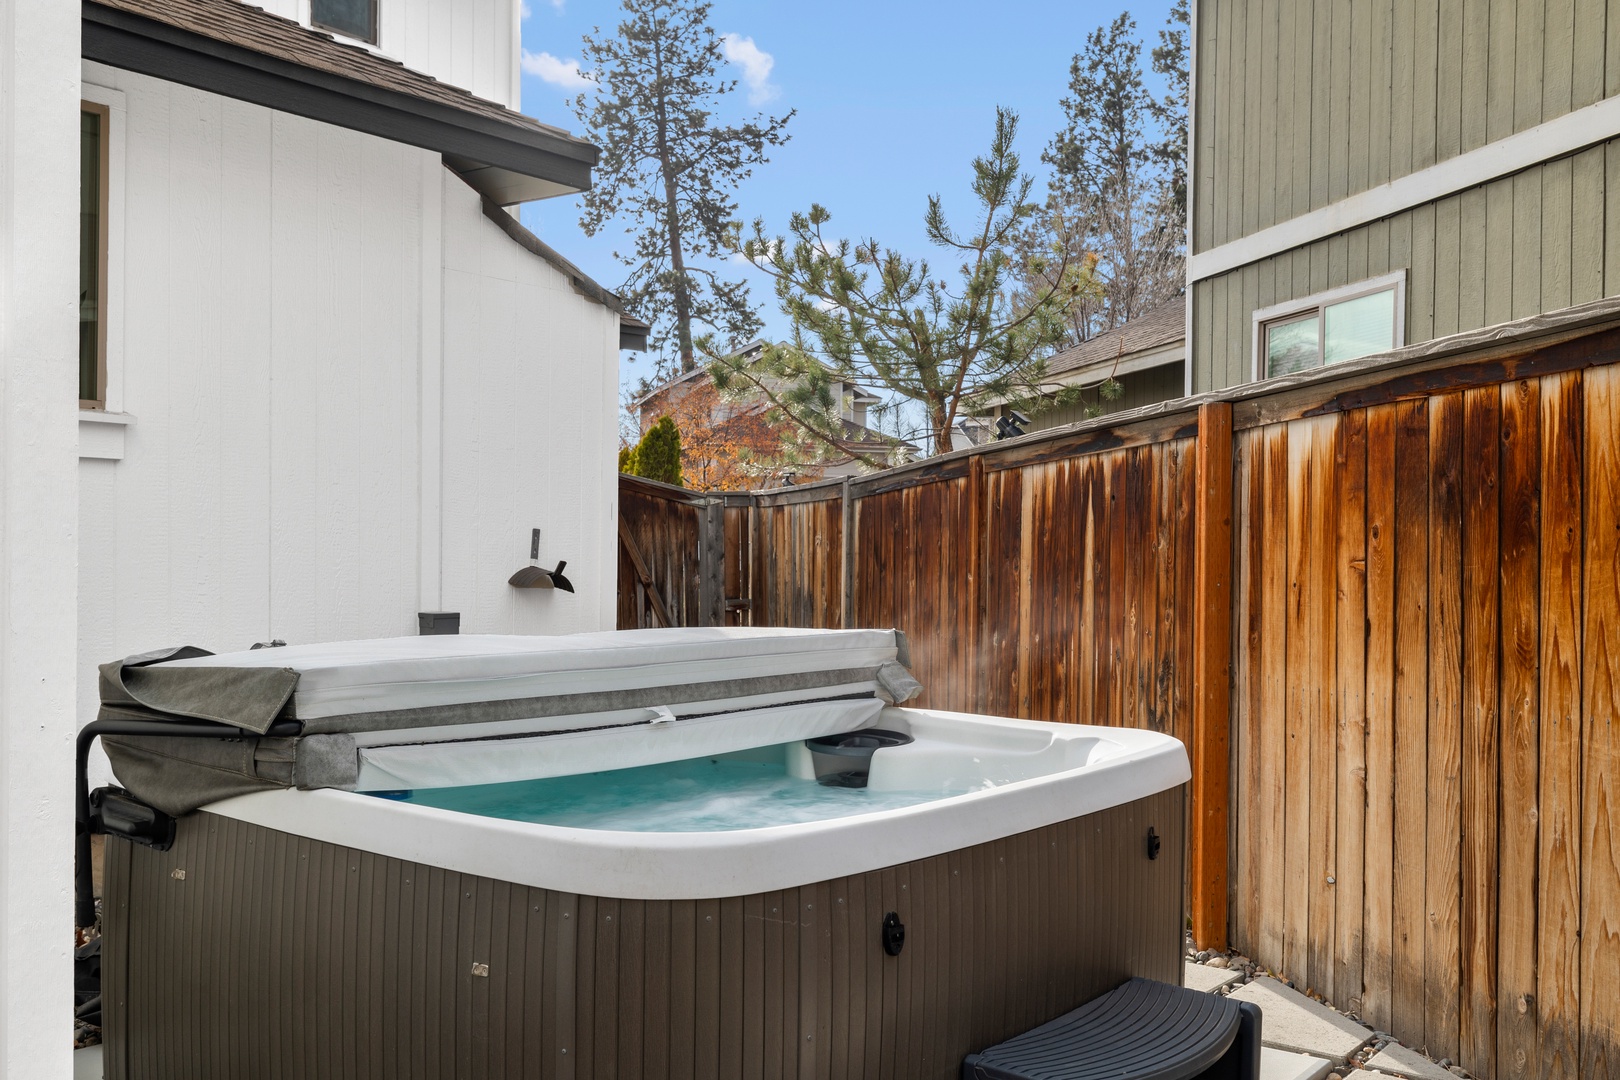 Soak your cares away in the private hot tub